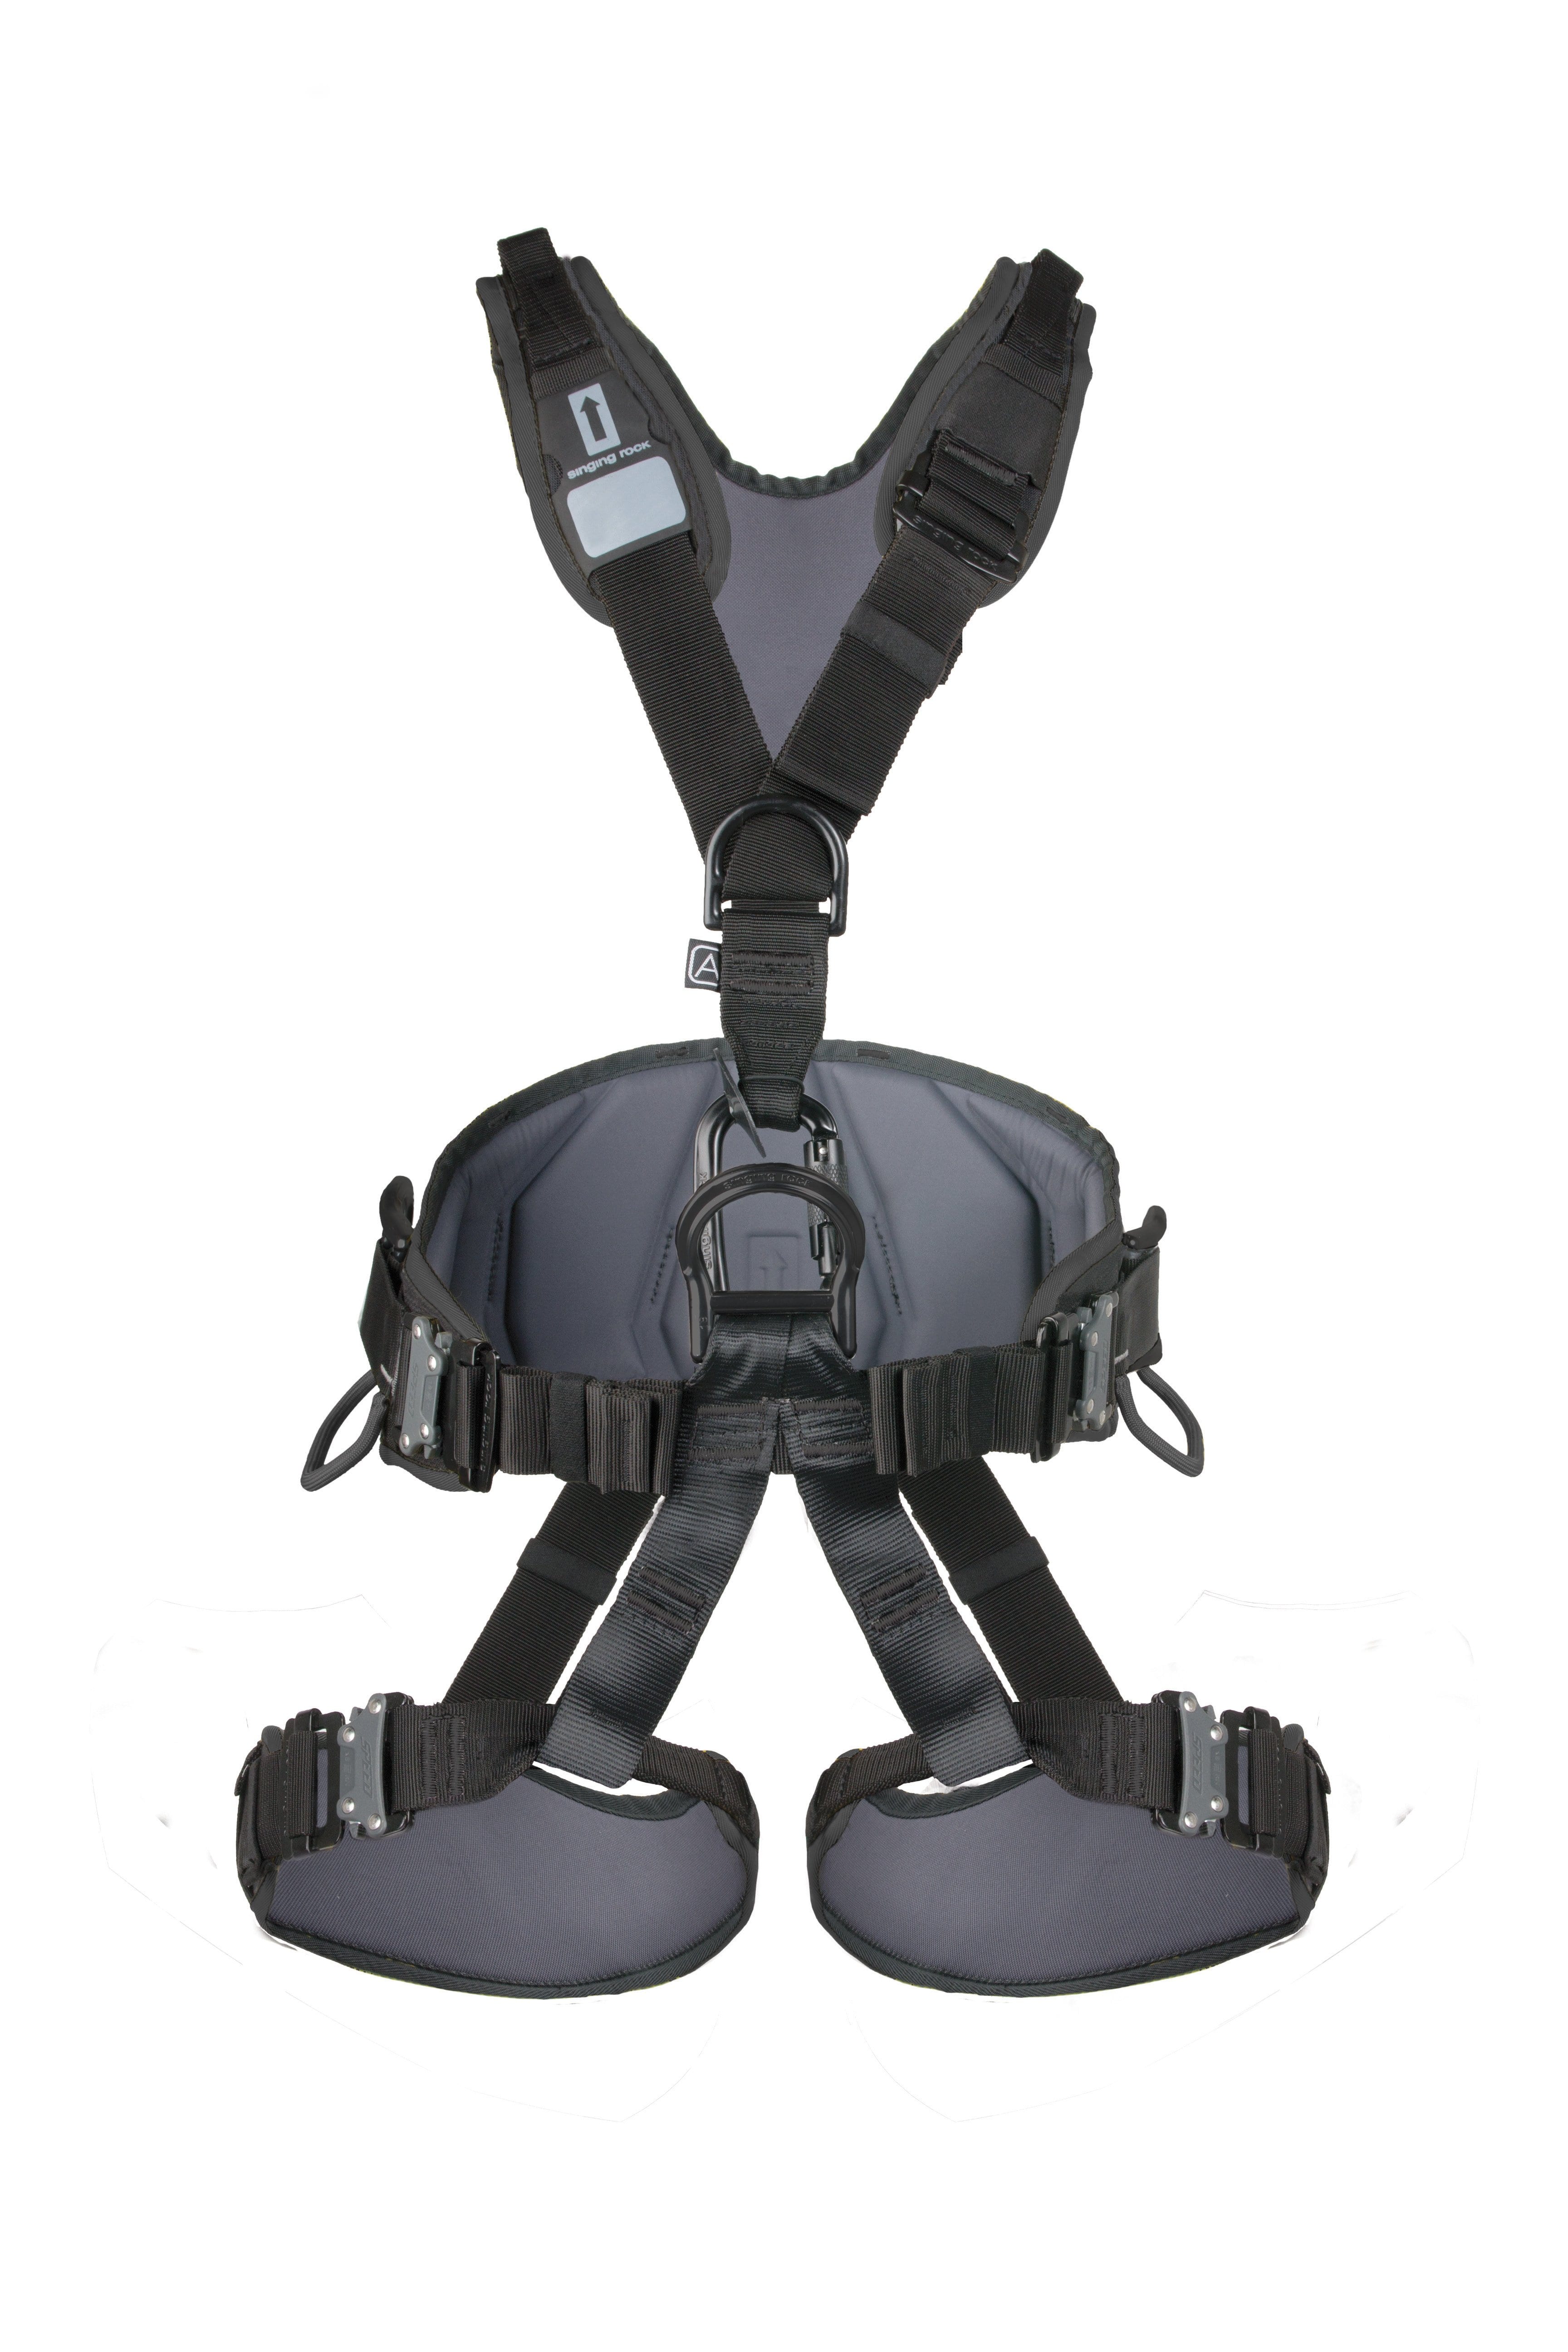 Singing Rock Expert 3D Speed Rope Access Harness in black